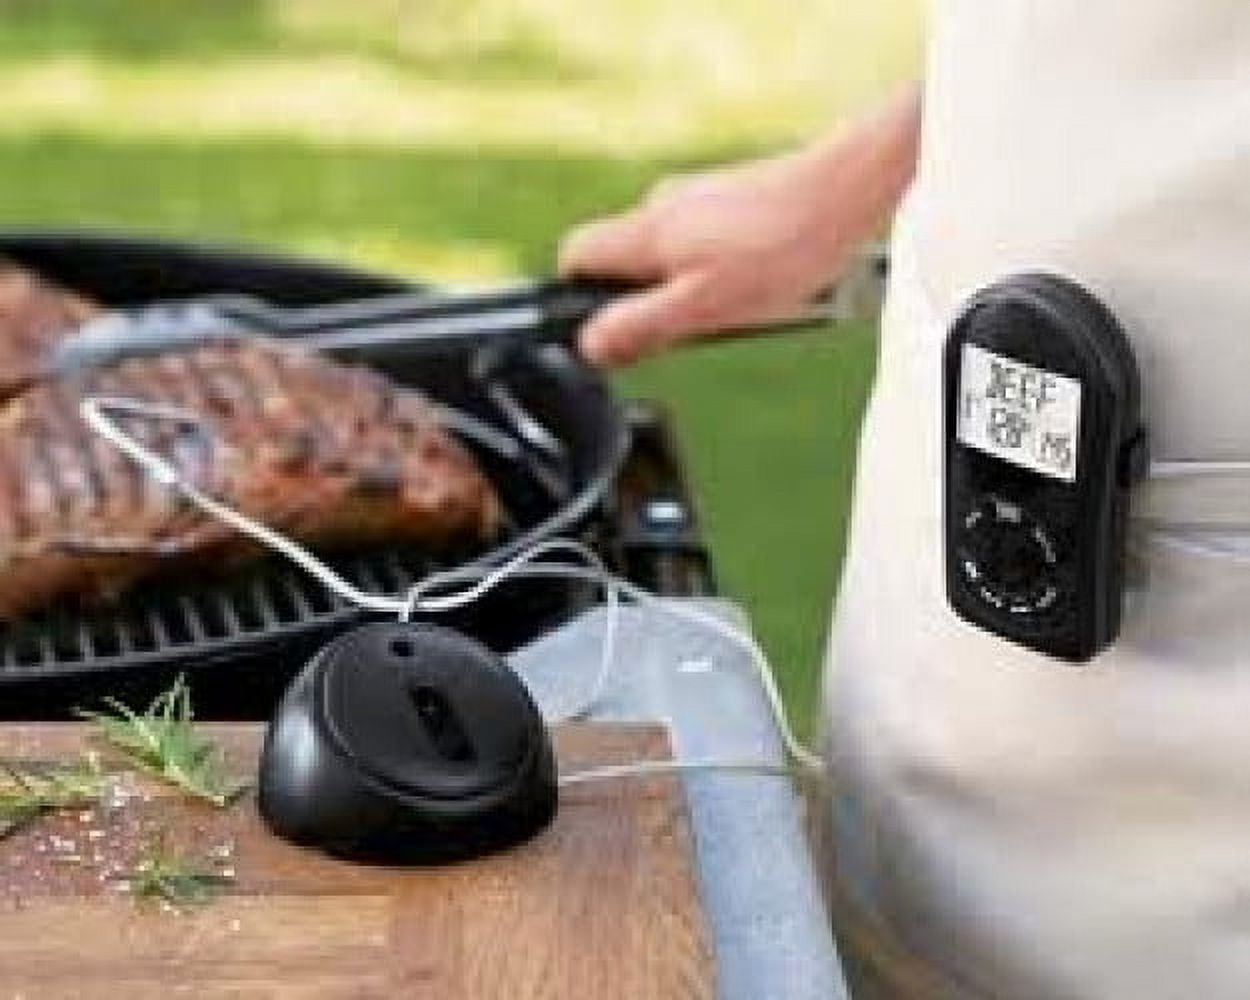 BBQ Butler Meat Thermometer Probe Clip - Works for Ambient Temperature Readings